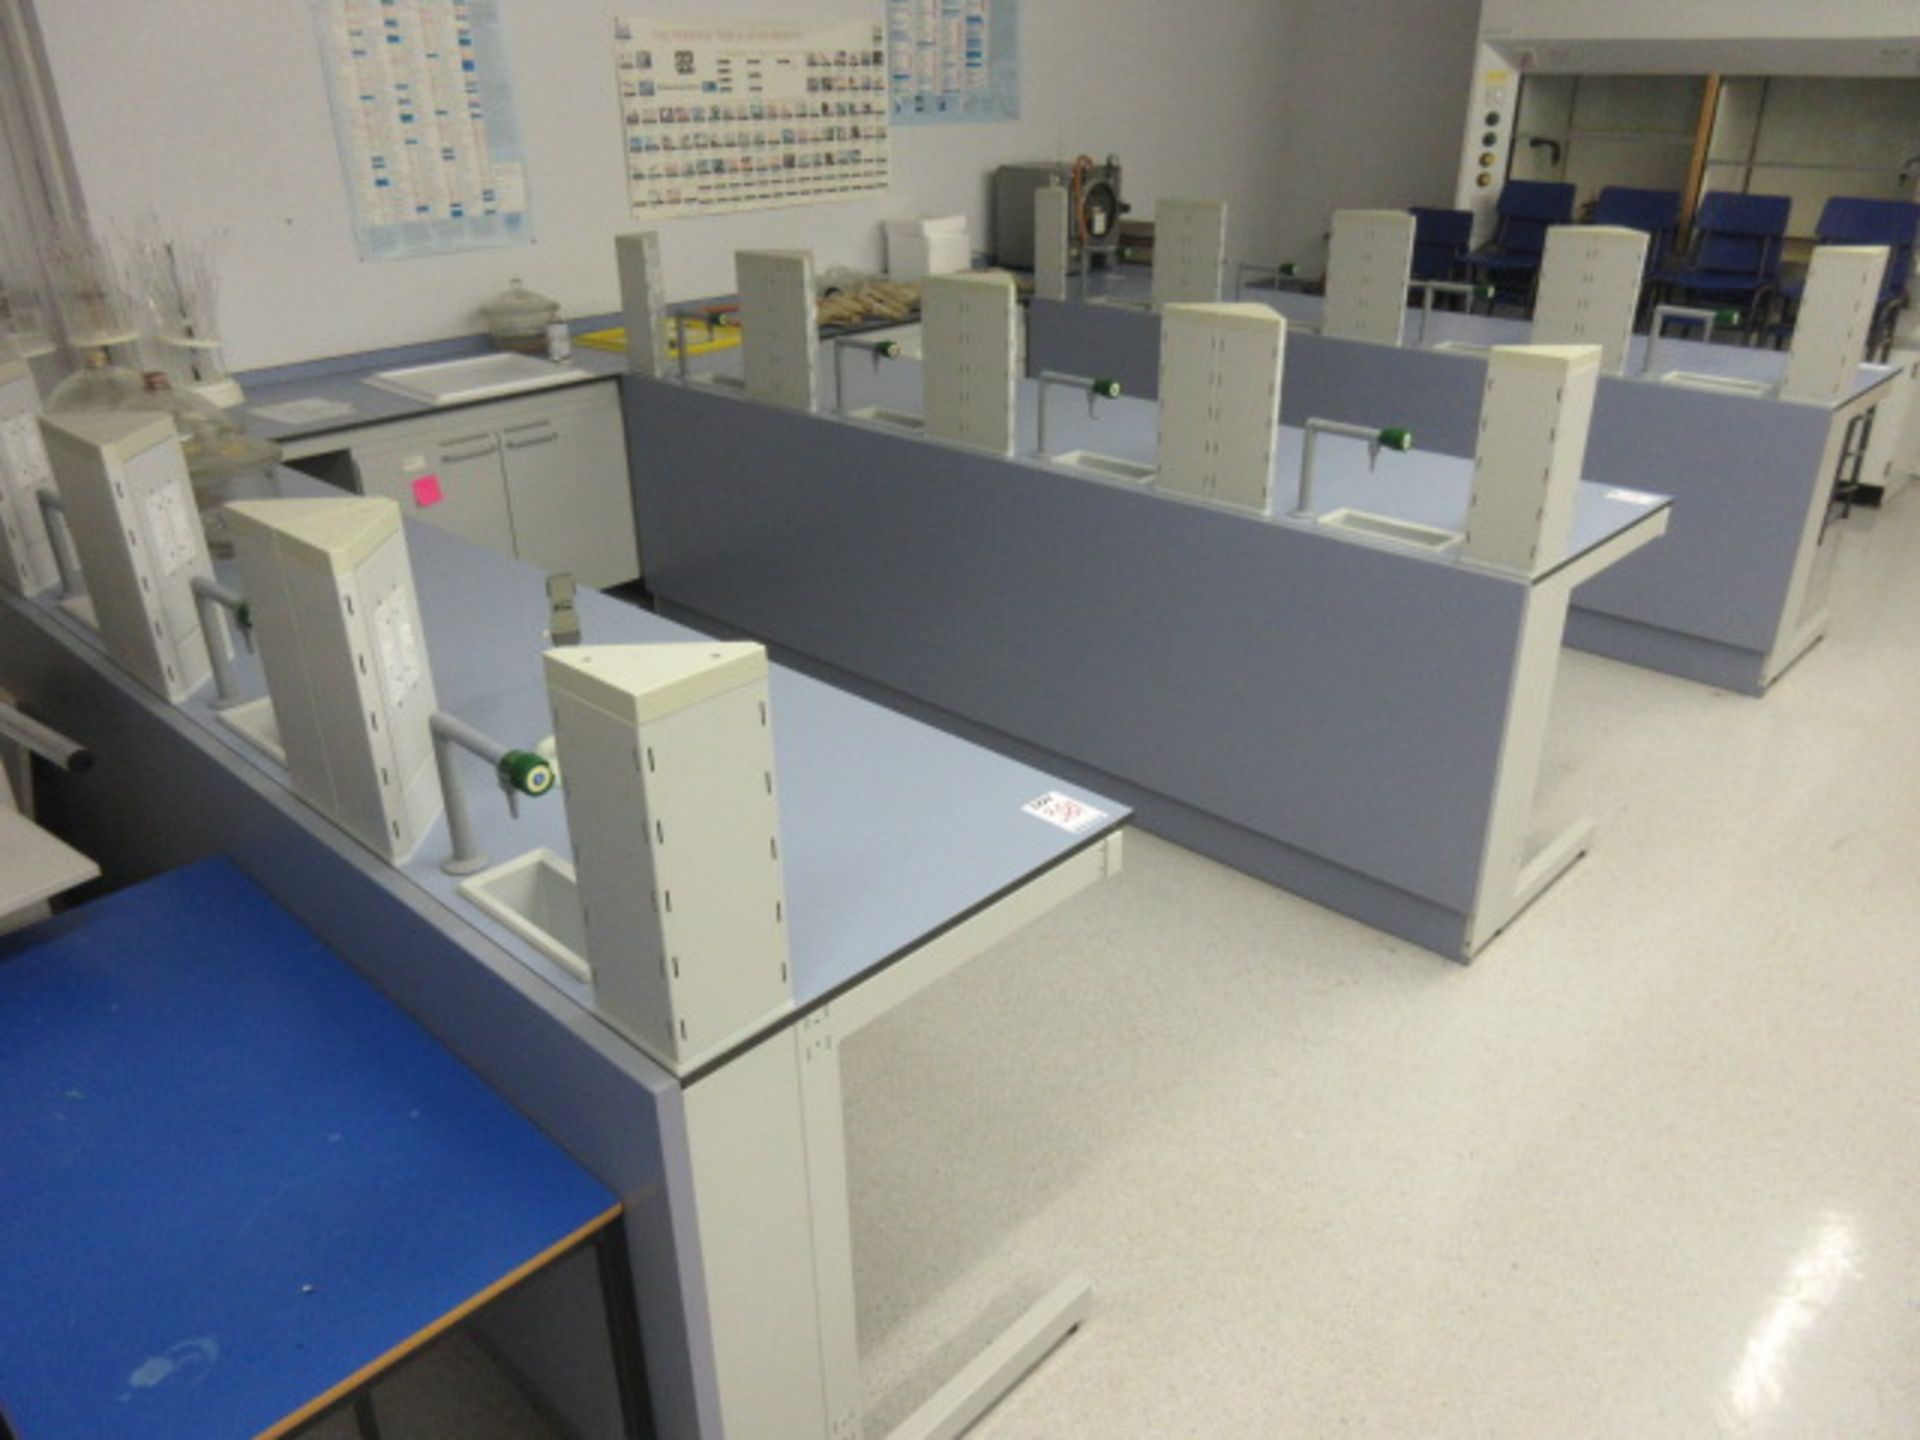 KOTTERMANN LABORATORY WORK STATION BENCHES. THREE RUN OF 4 WORK STATIONS WITH END BENCH THAT - Bild 2 aus 3